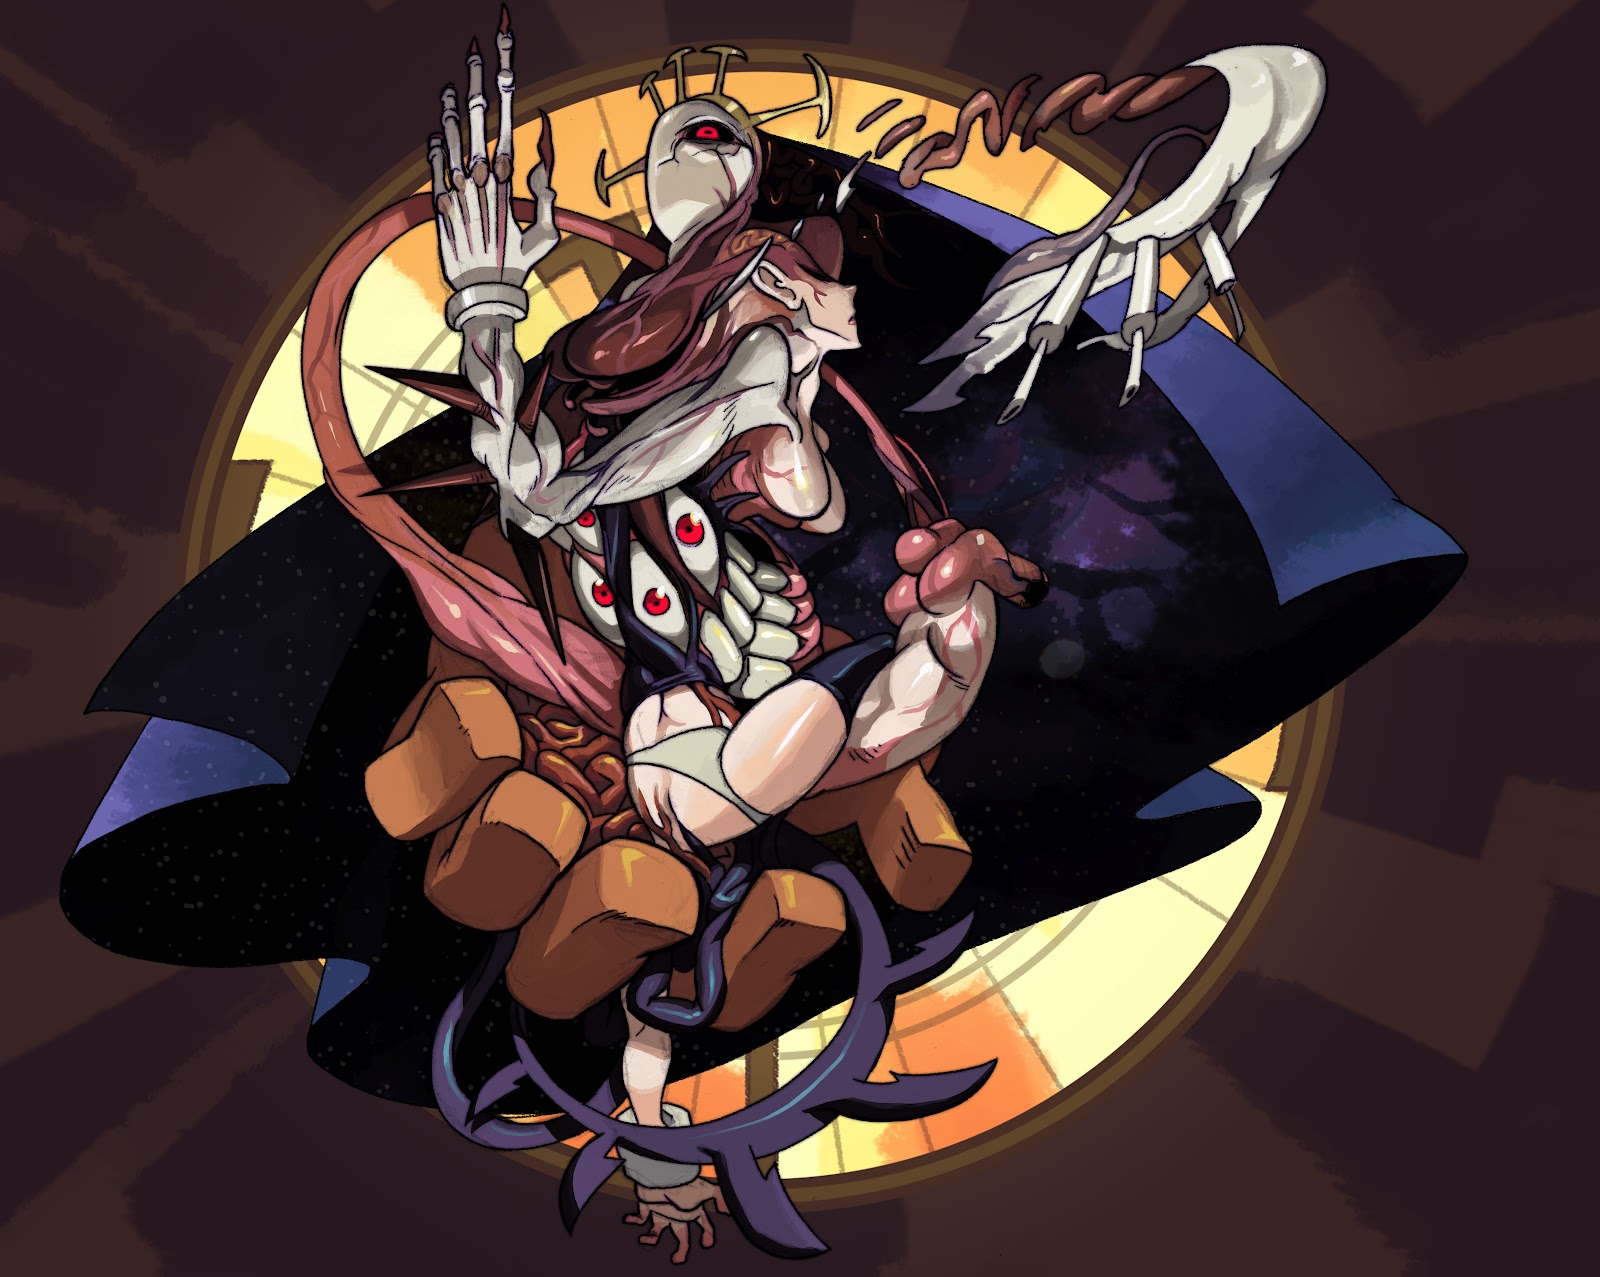 Skullgirls proudly presents the following tropes.